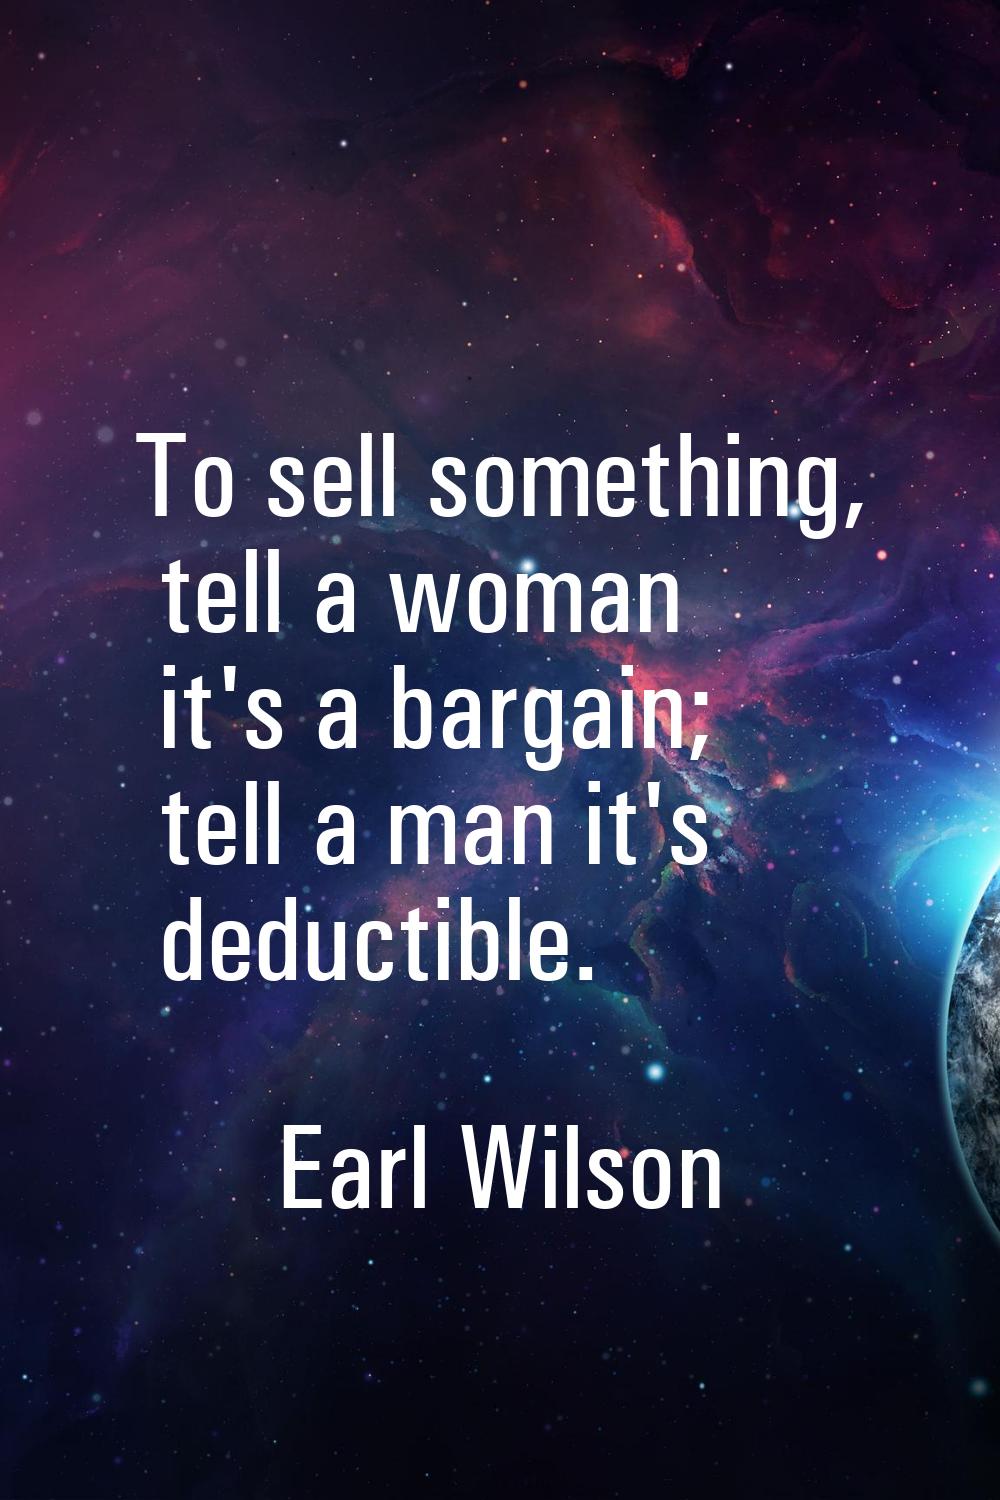 To sell something, tell a woman it's a bargain; tell a man it's deductible.